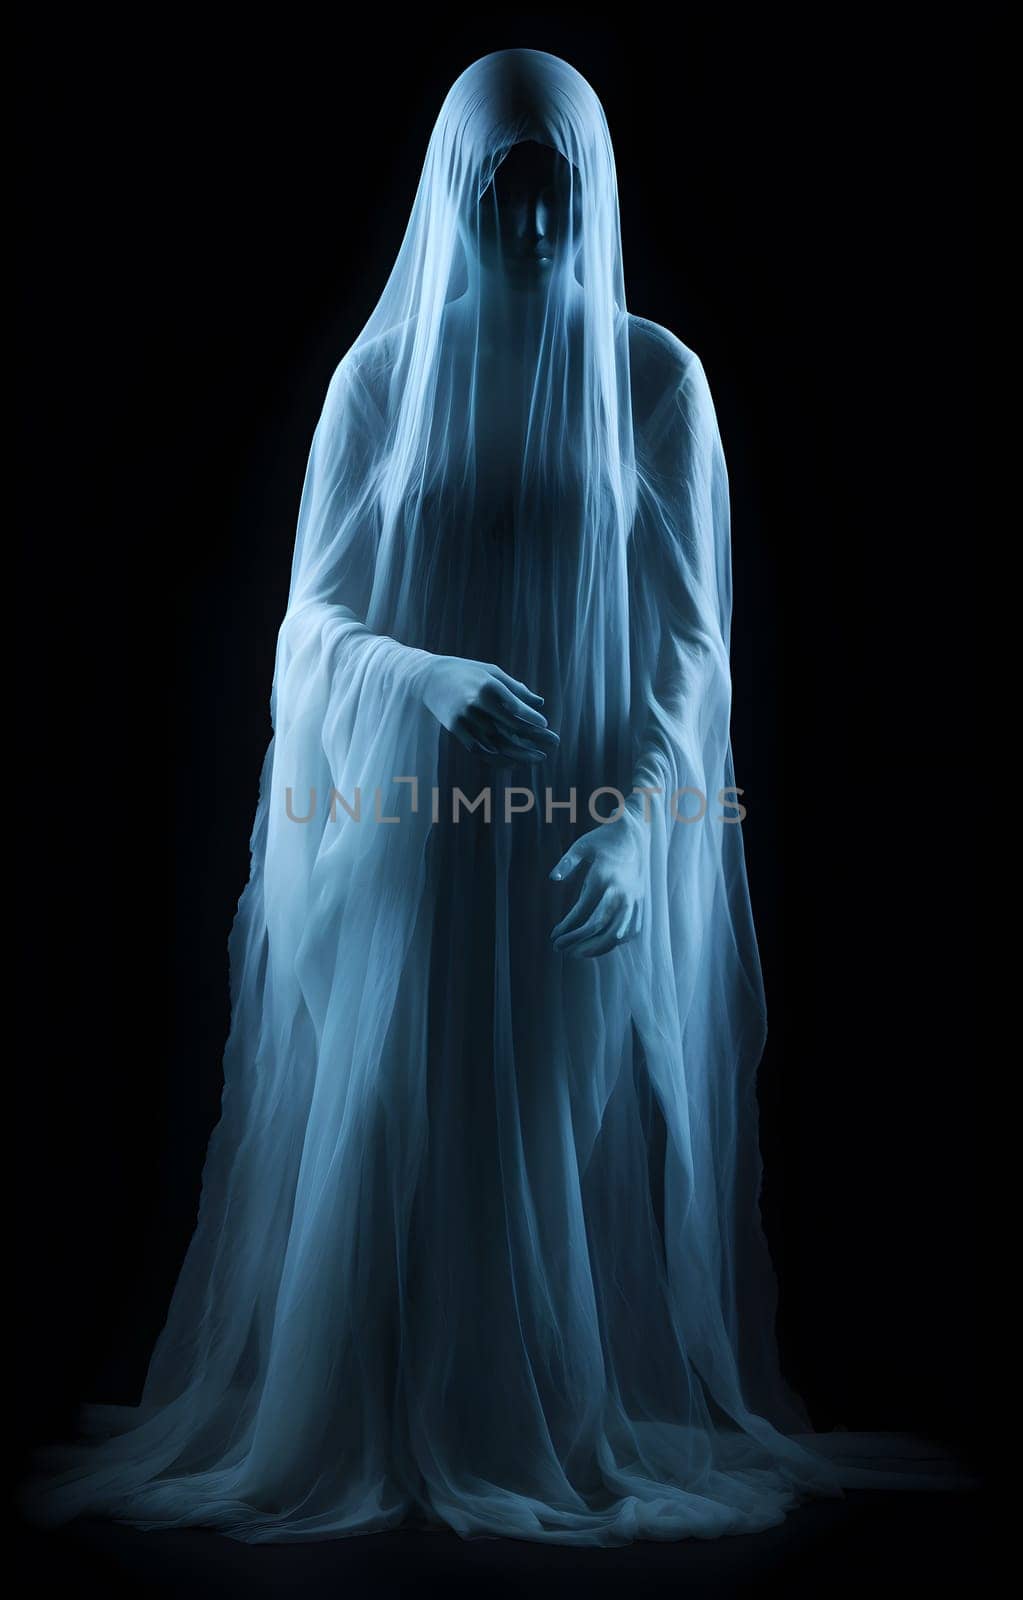 A mysterious woman ghost cloaked in a billowing white veil evokes a sense of ethereal beauty and untold secrets